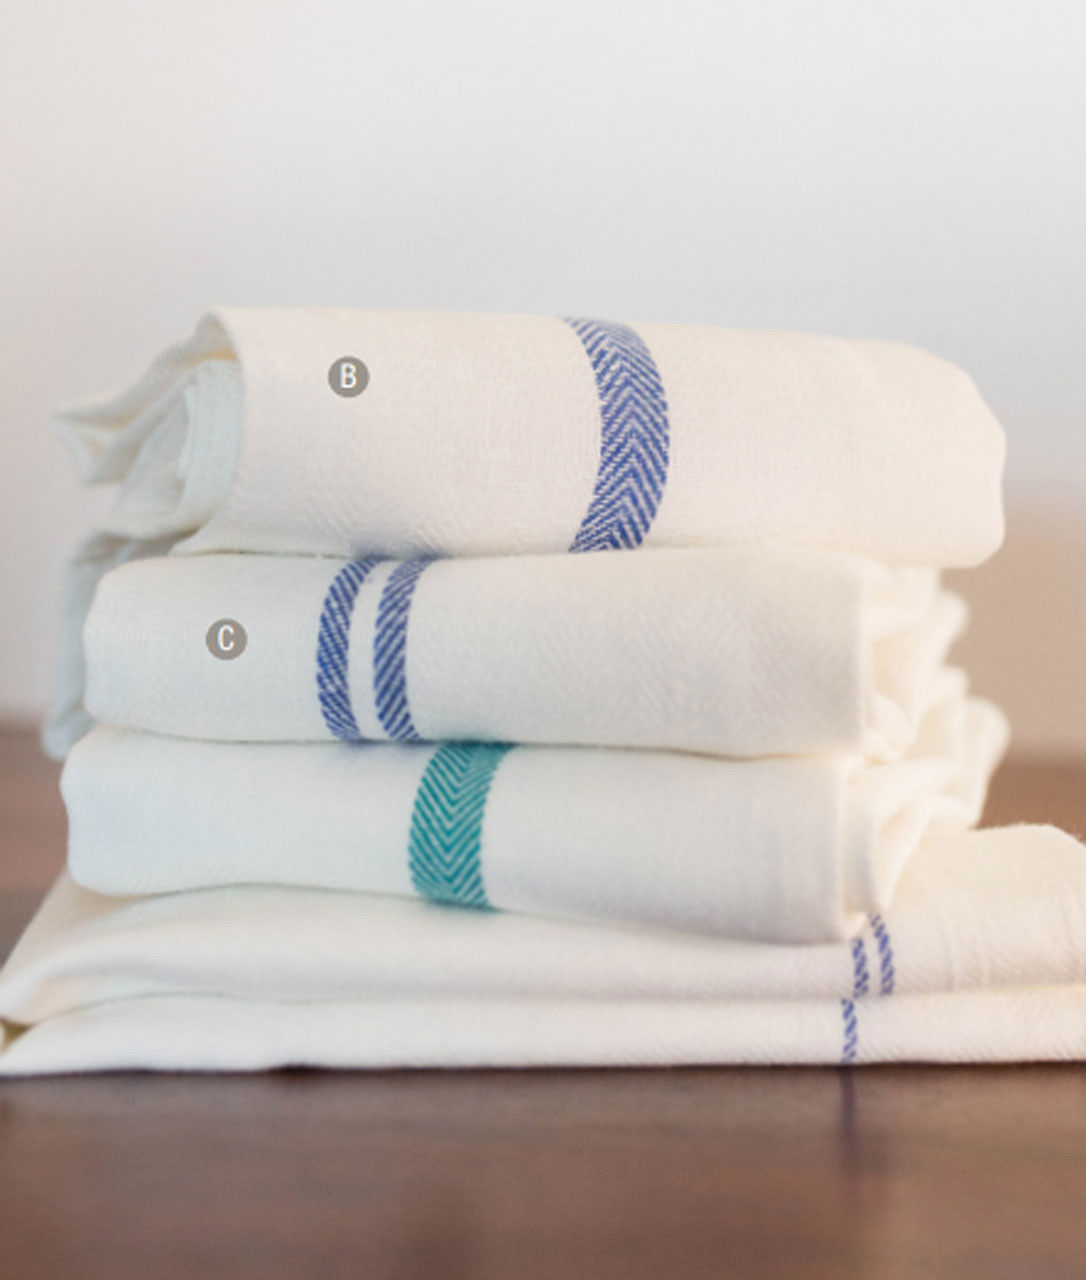 What designs can I find on 100 percent cotton kitchen towels?